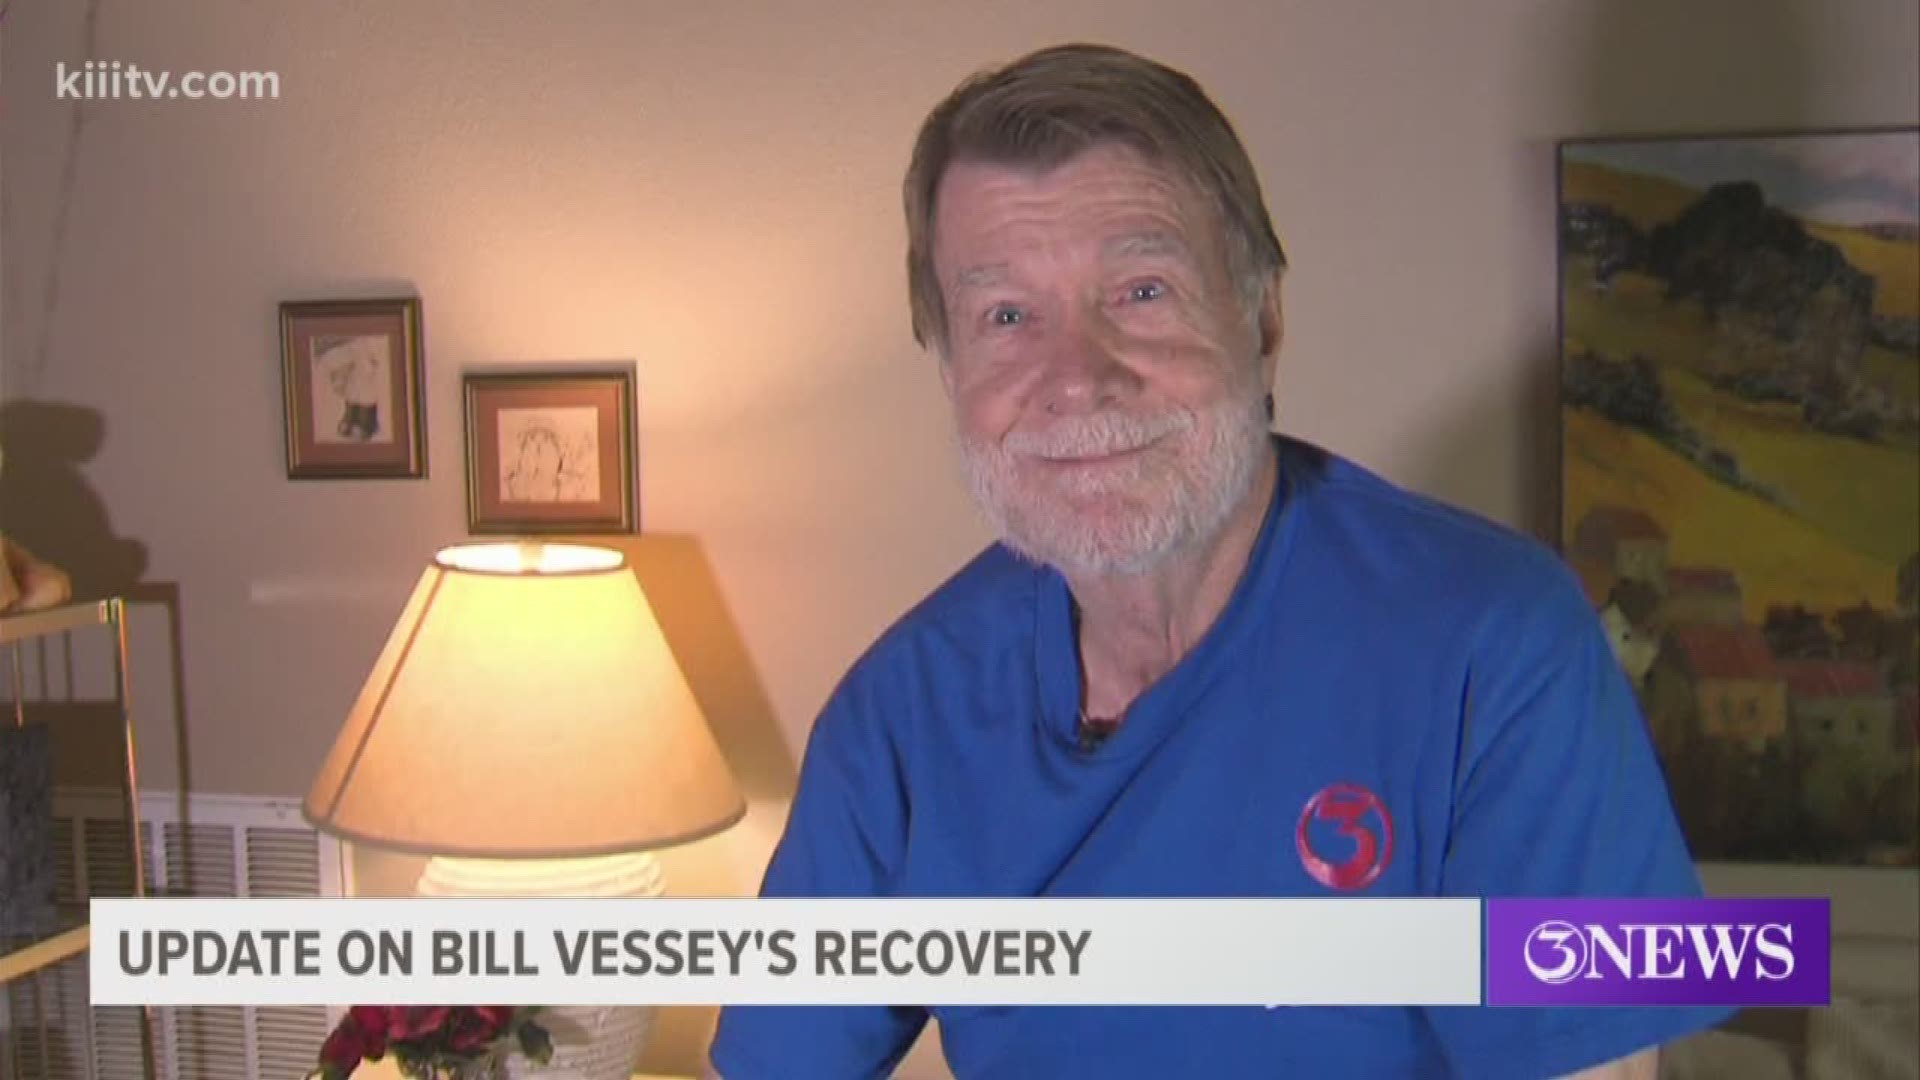 Doctors say Bill Vessey has been making significant progress after suffering a hemorrhagic stroke back in November of 2019.